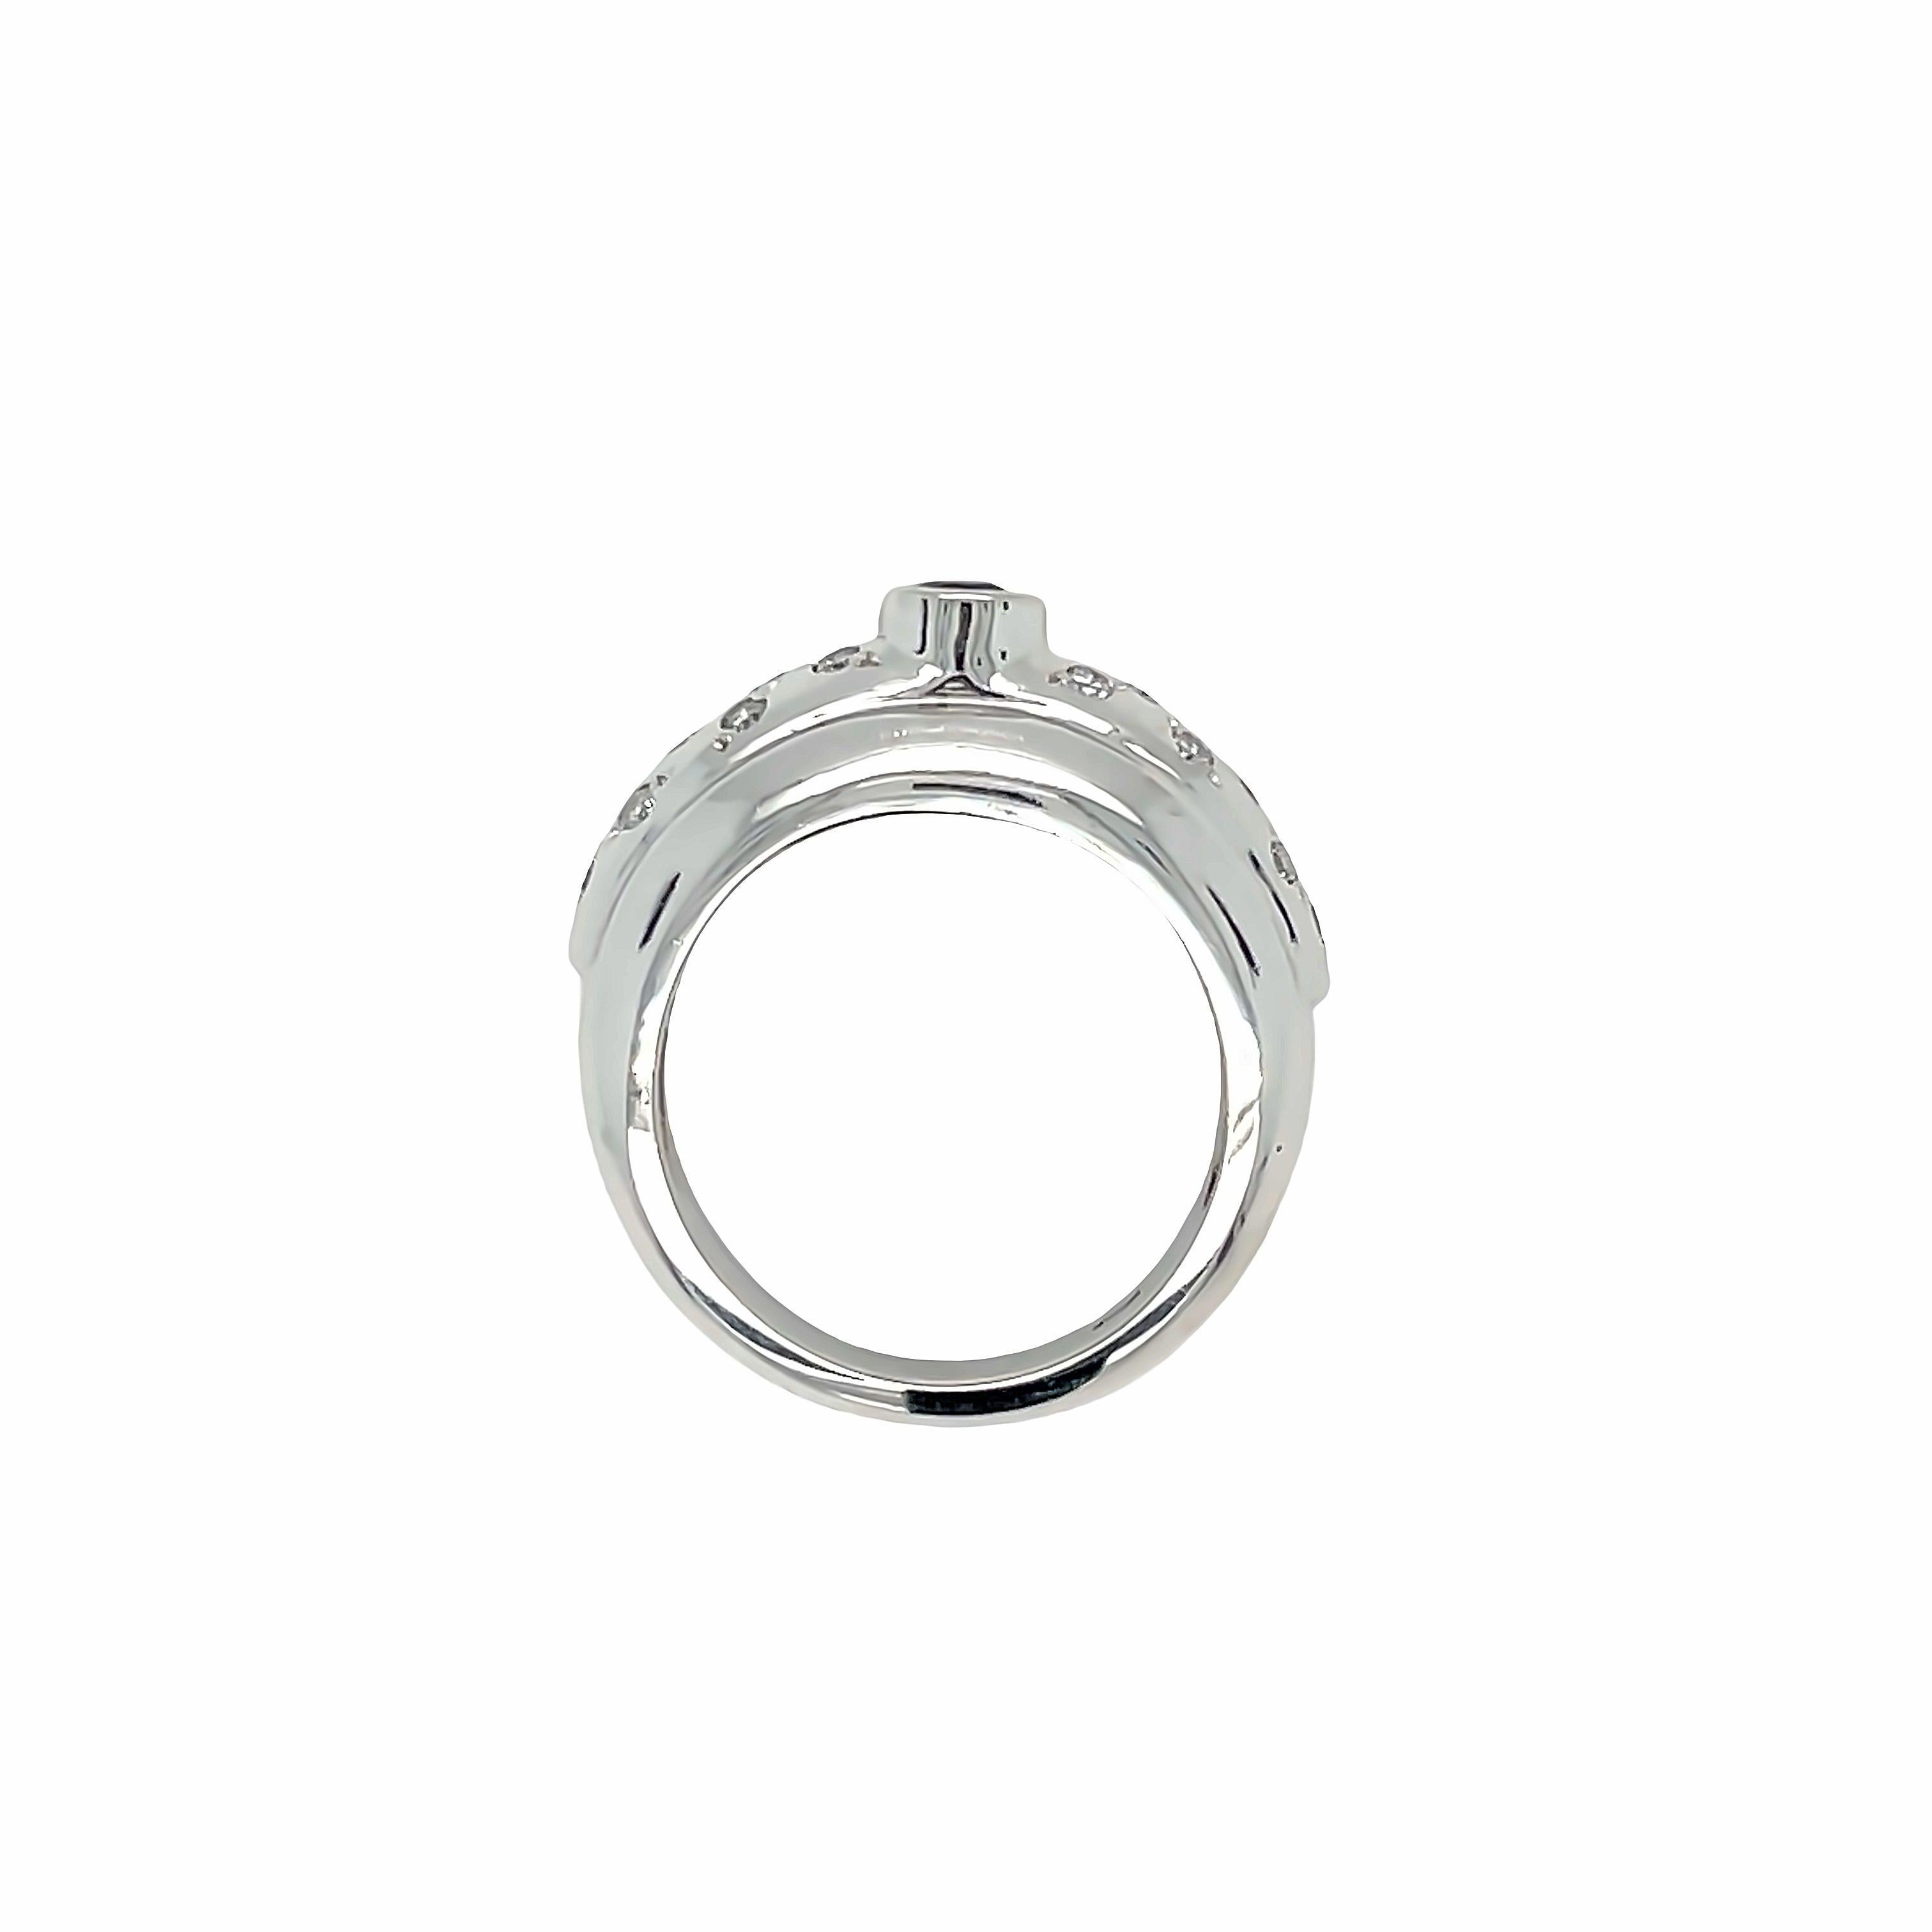 Elegant and contemporary, this 14K White Gold Sapphire Diamond Ring features a stunning round Sapphire weighing approximately 0.25 carat. Center Sapphire is beautifully showcased in a raised bezel setting, complemented by a dome setting adorned with